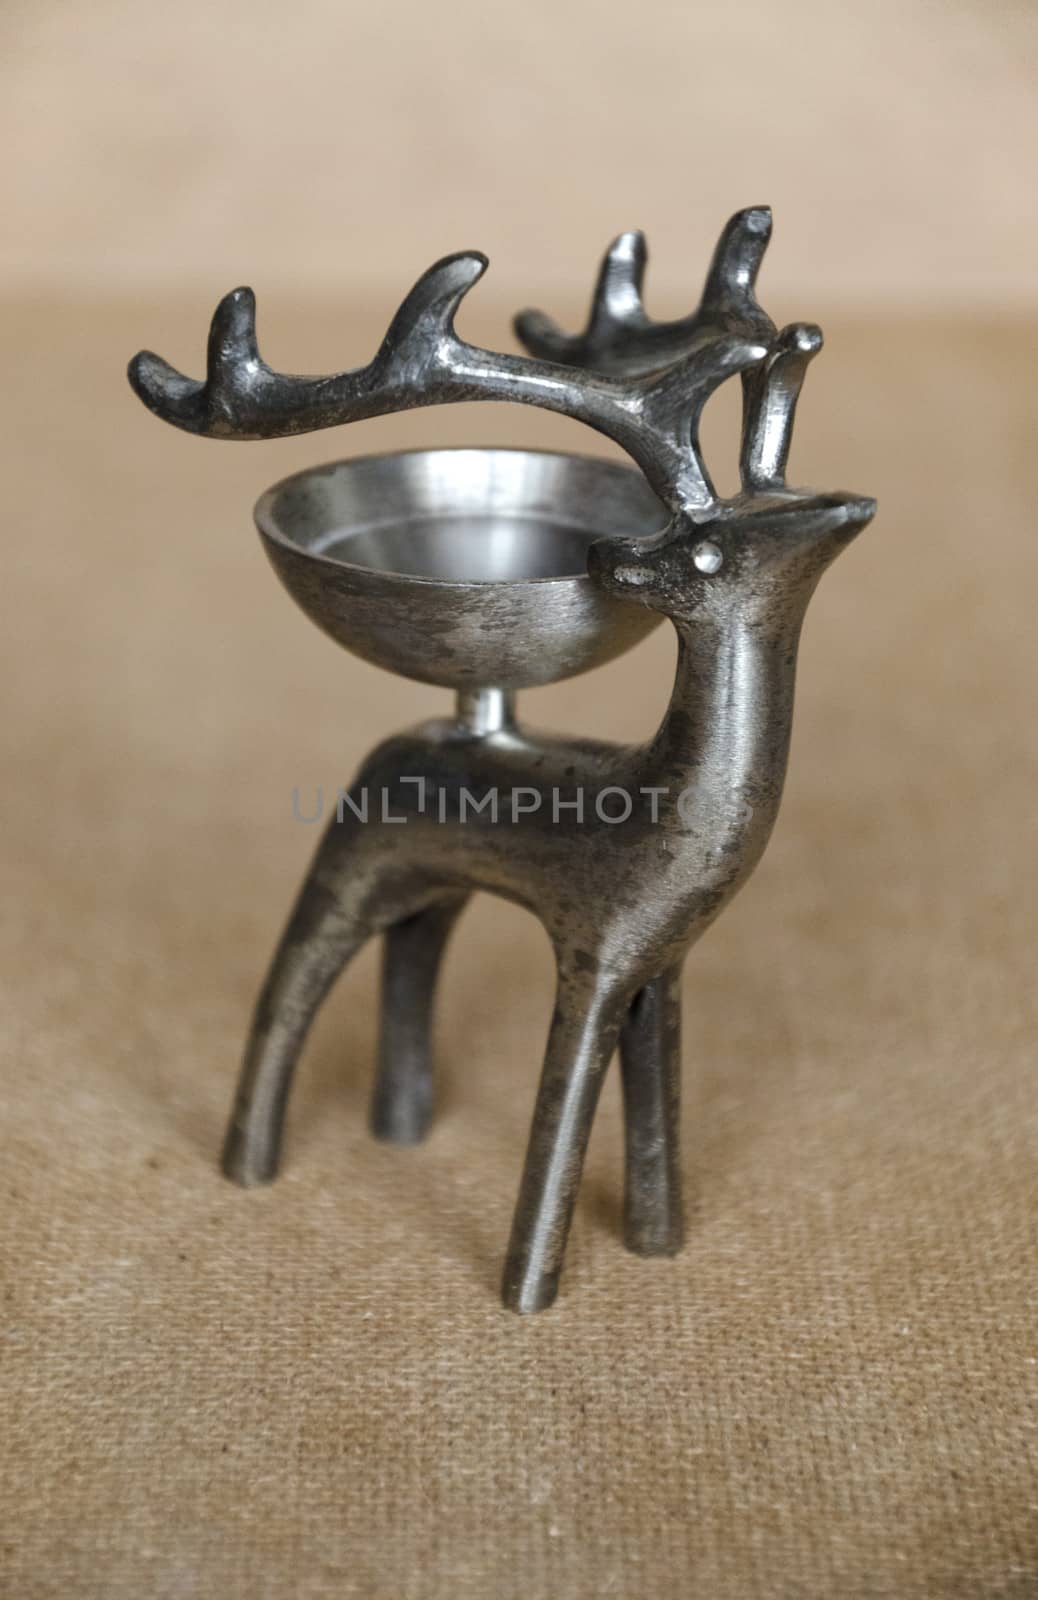 The Vintage metal stand, candlestick in the form of a deer with a bowl on her back